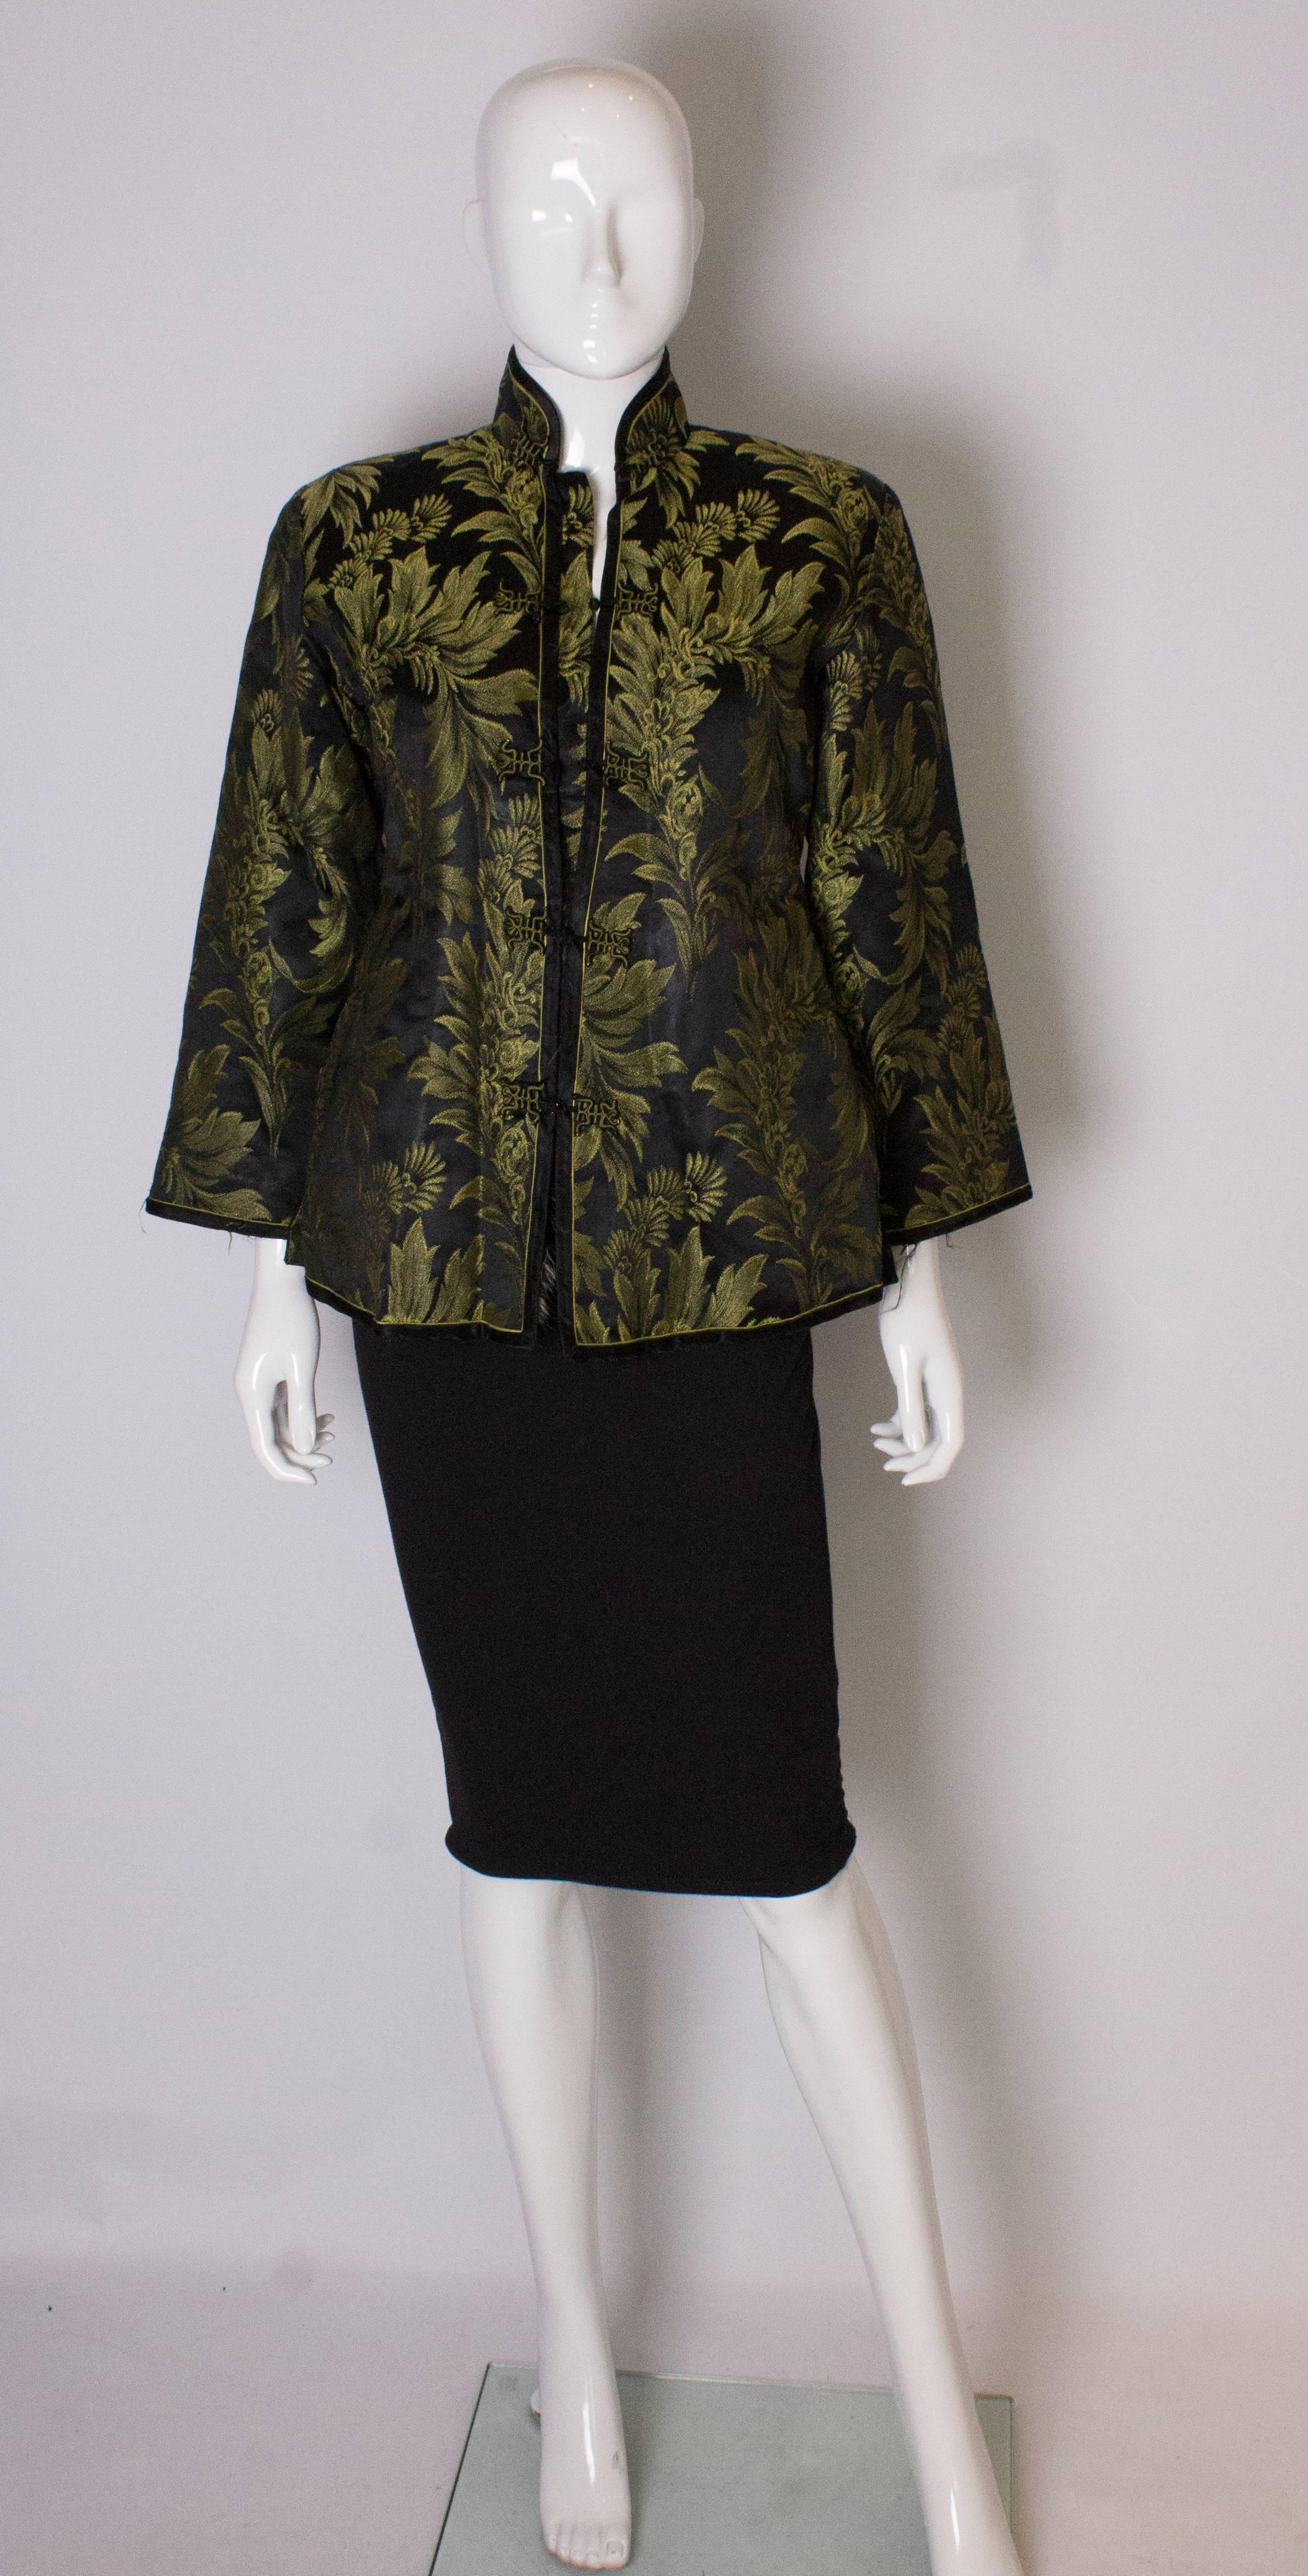 A chic fur lined Chinese jacket. The jacket is in a black silk with yellow/green floral design and is fur lined. It fastens with toggles, and has 6'' slits st the side.